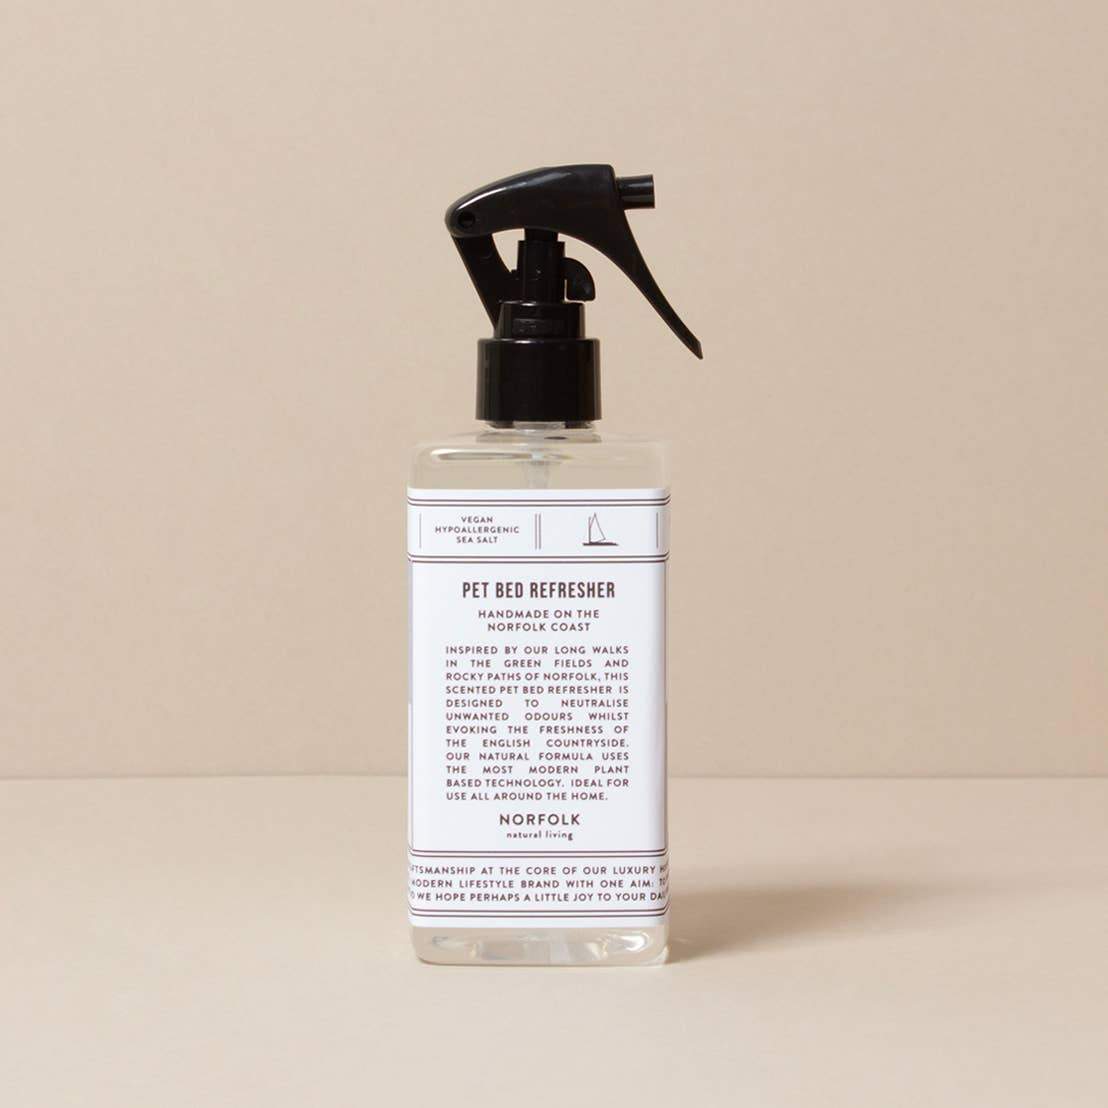 A spray bottle of Norfolk Natural Living Coastal Pet Bed Refresher, with natural ingredients, featuring a white label and black text with a trigger spray top, displayed against a light beige background.